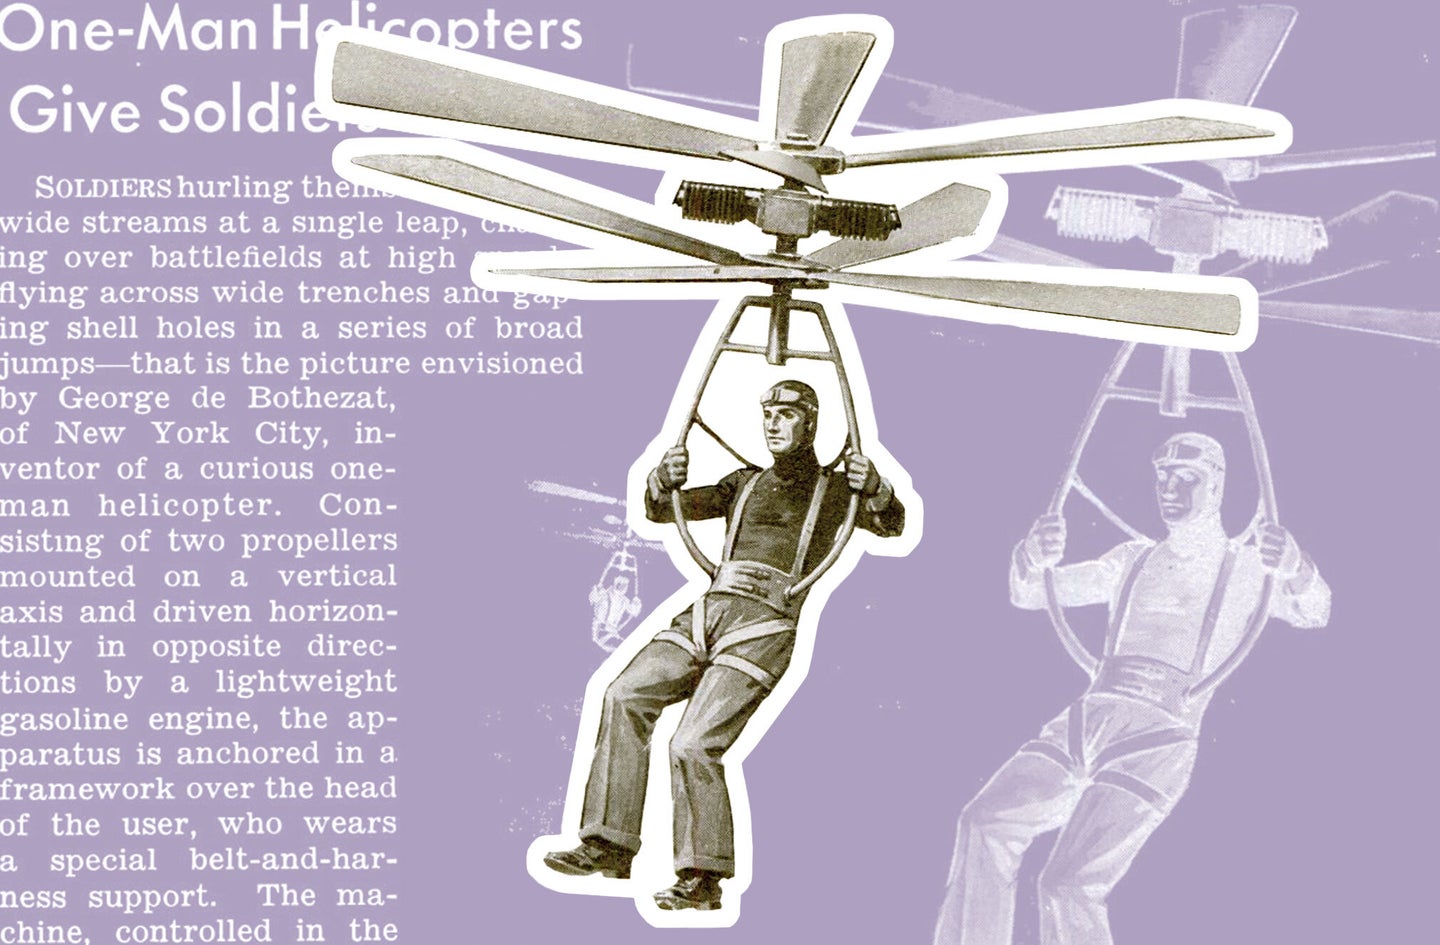 Archival material from Popular Science's coverage of jetpack attempts